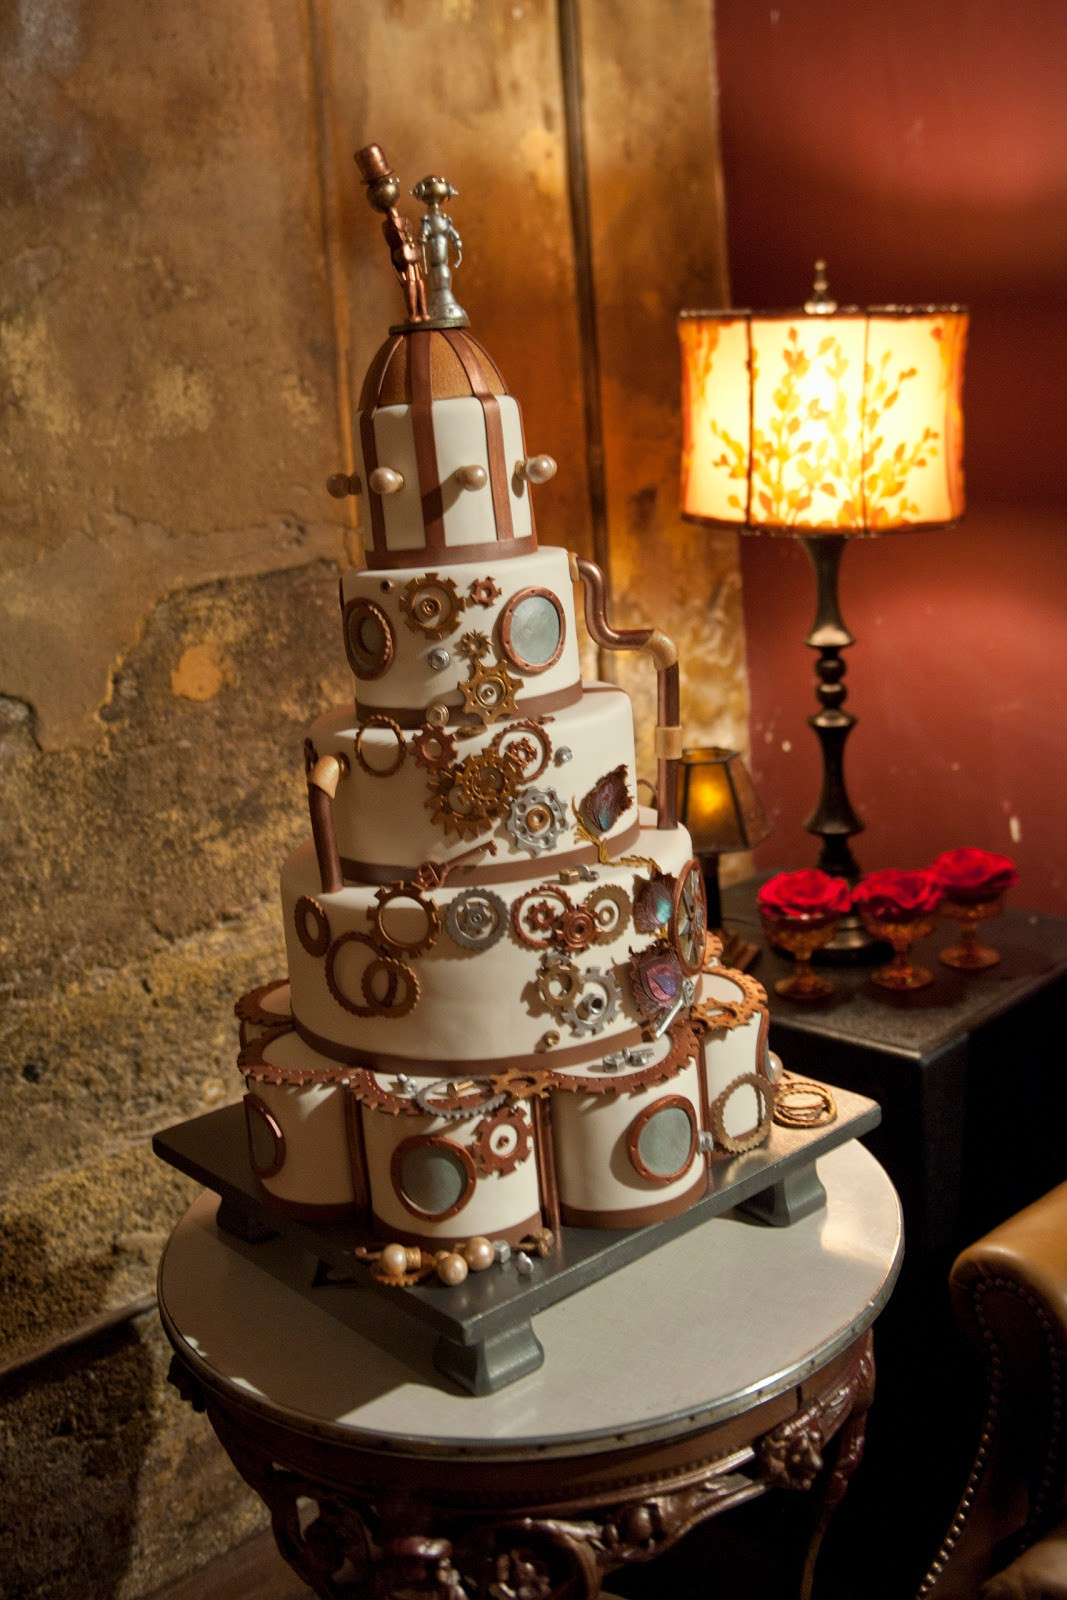 Steampunk Wedding Cakes
 sTORIbook Weddings Shabby Chic at Calamigos Ranch in